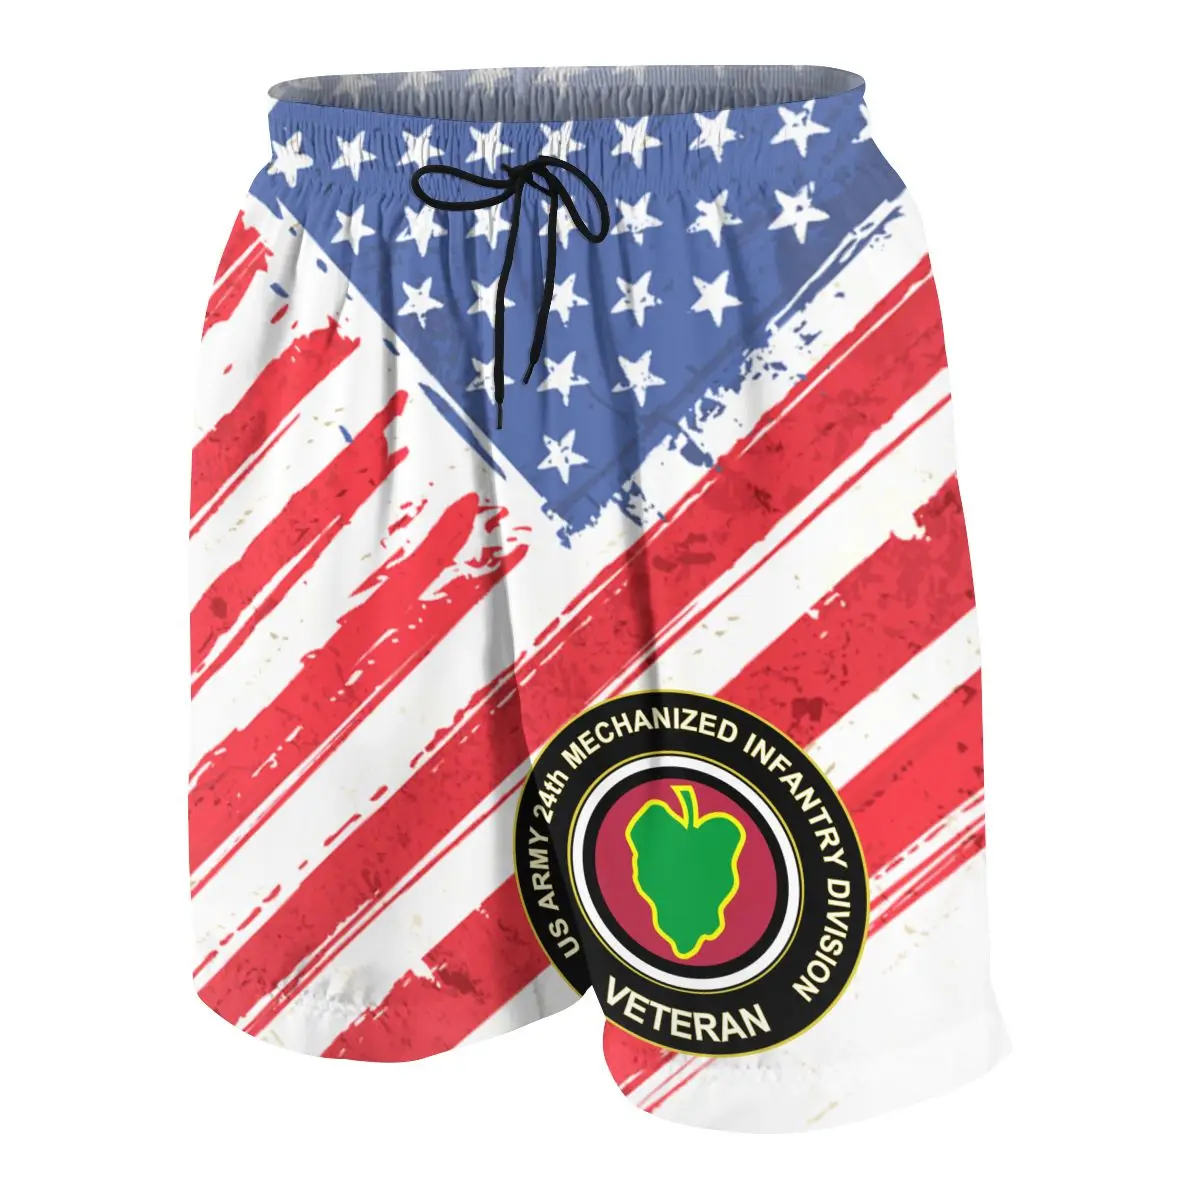 

US Army Veteran 24th Mechnized Infantry Division Youngsters Shorts Joggers Quick-dry Cool Short Pants Casual Beach Sweatpants